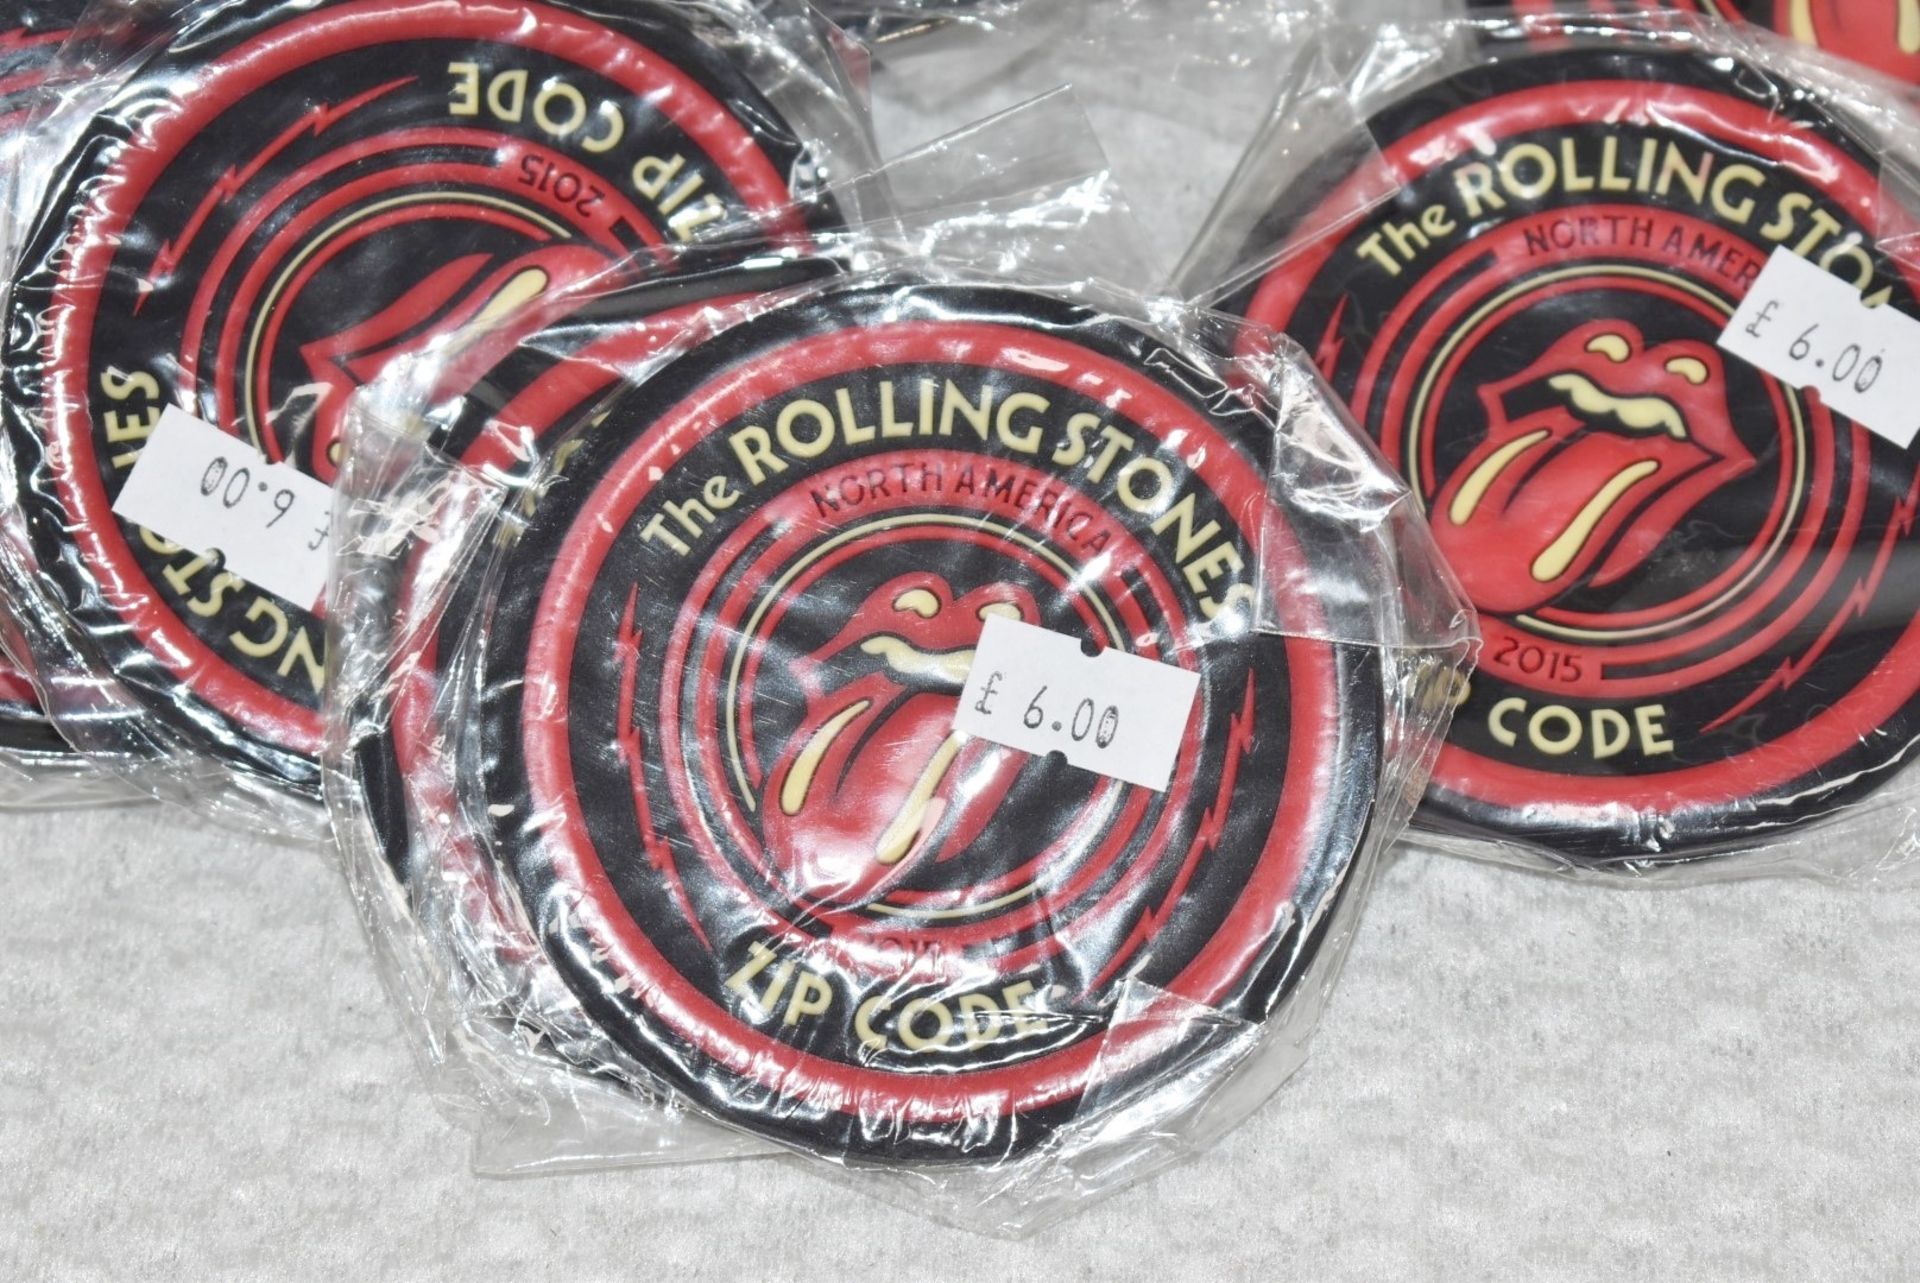 20 x Rolling Stones Table Coasters - North America Zip Code Tour With Iconic Tongue and Lips - Image 5 of 6